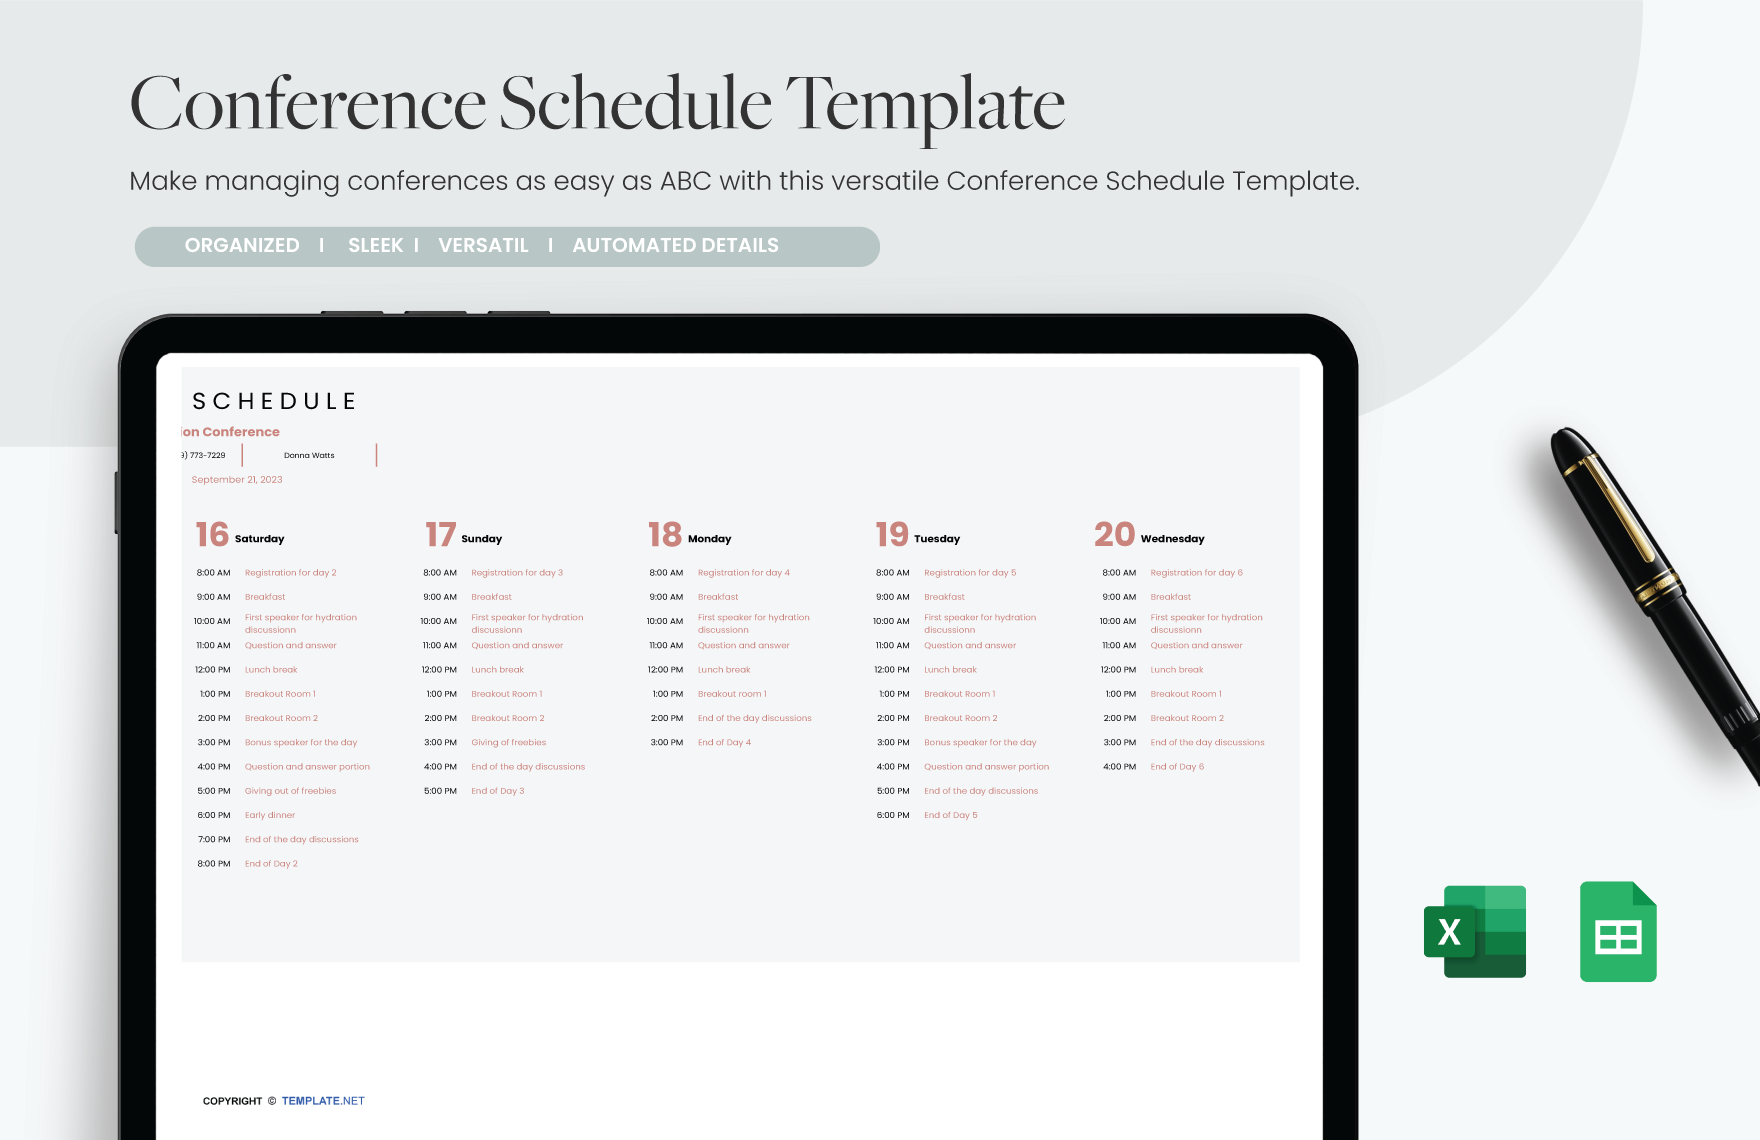 Conference Schedule Template Download in Excel, Google Sheets